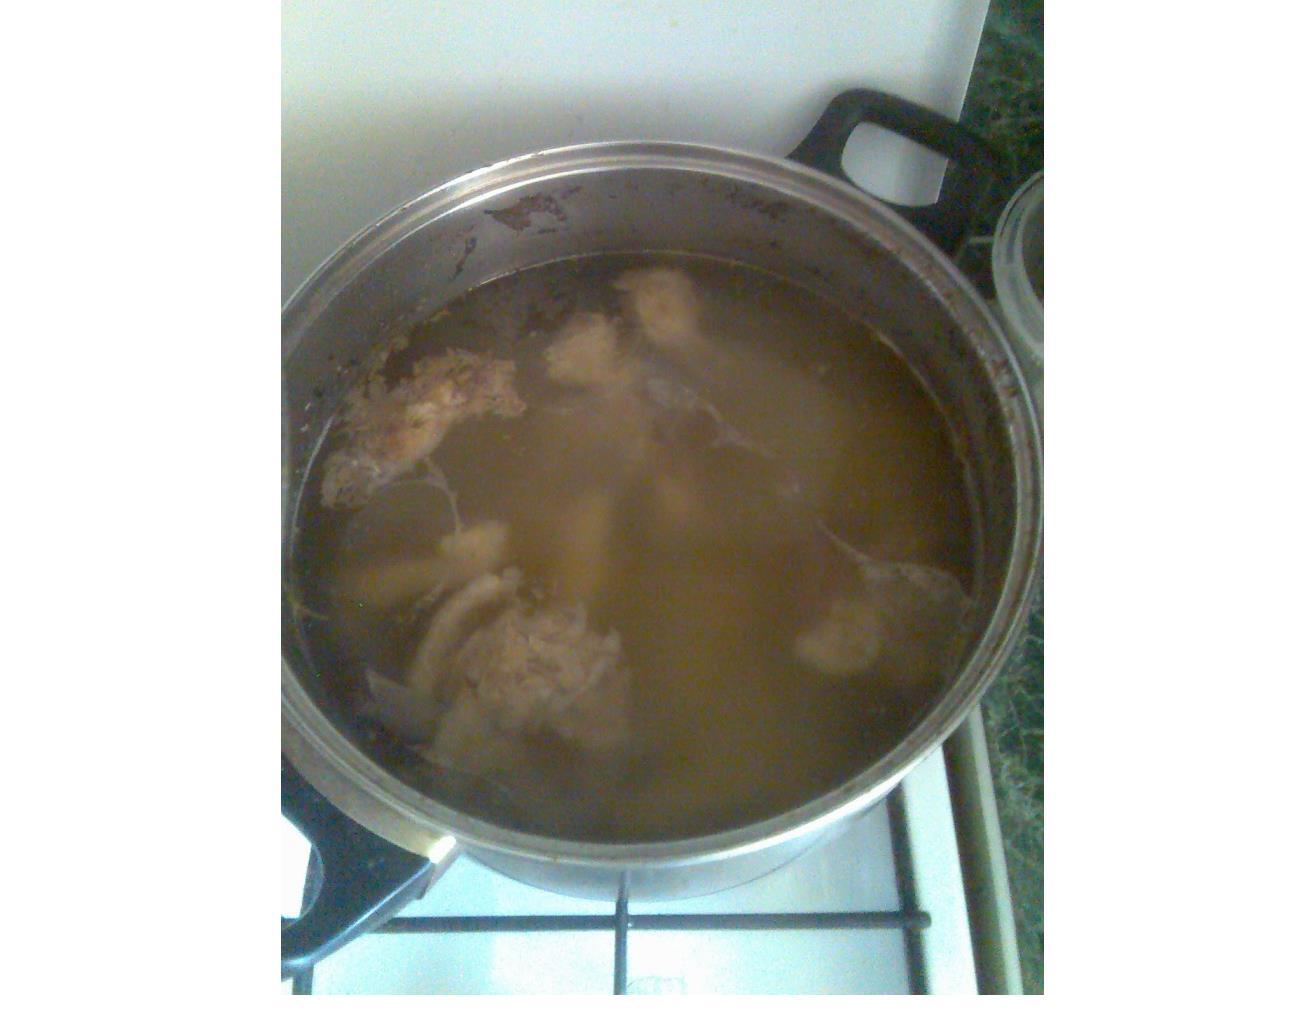 How do I make soup? - My, Soup, Perlovka, Men's cooking, Beef, Mutton, Longpost